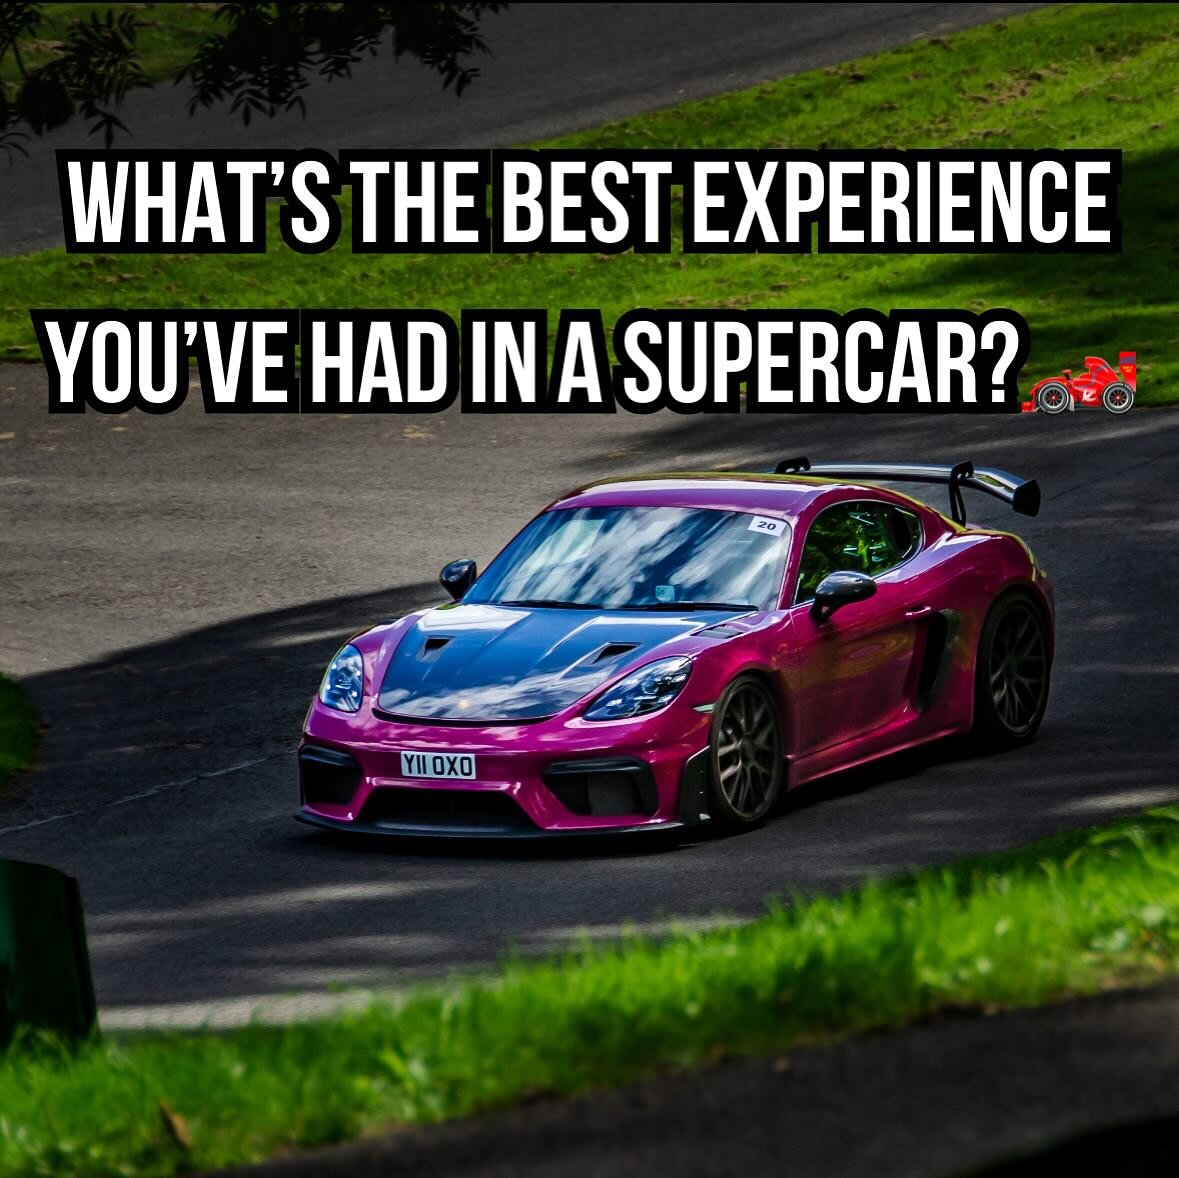 Comment your experience below👇🏎️
&bull;
&bull;
📸 Photography by @lukeseyeview 
&bull;
&bull;
 #lamborghinis  #carporn101 #carsofınstagram #supercardaily700 #exoticcars247 #carsandcoffe #carlifestyles #amazingcarsdaily #sportscarsofinstagram  #cars